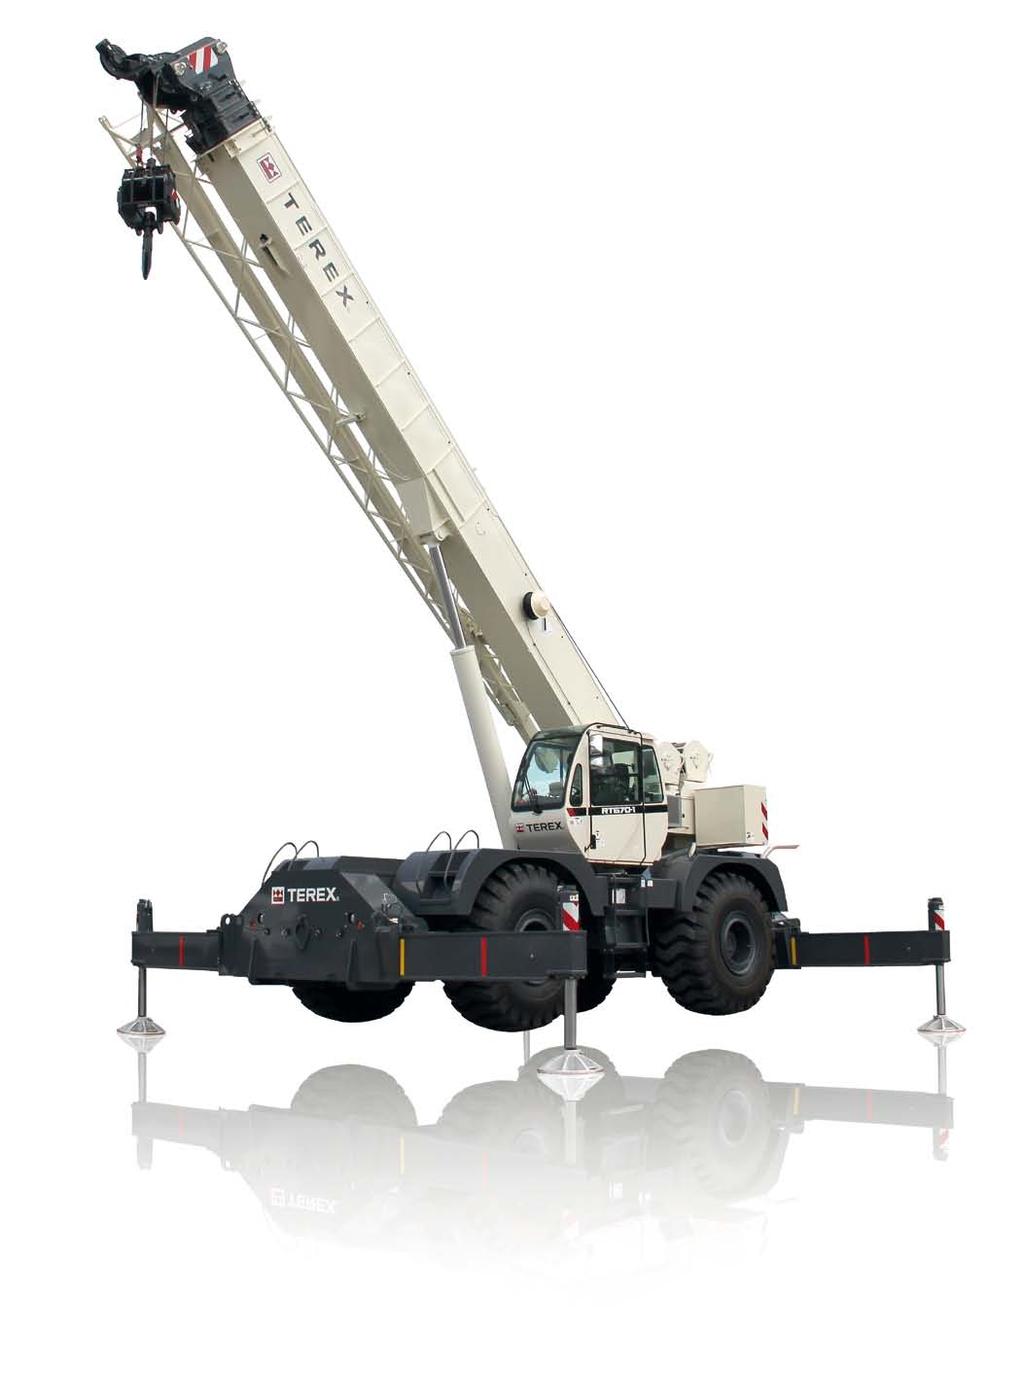 70 US t Lifting Capacity Rough Terrain Cranes Datasheet Imperial Features Rated